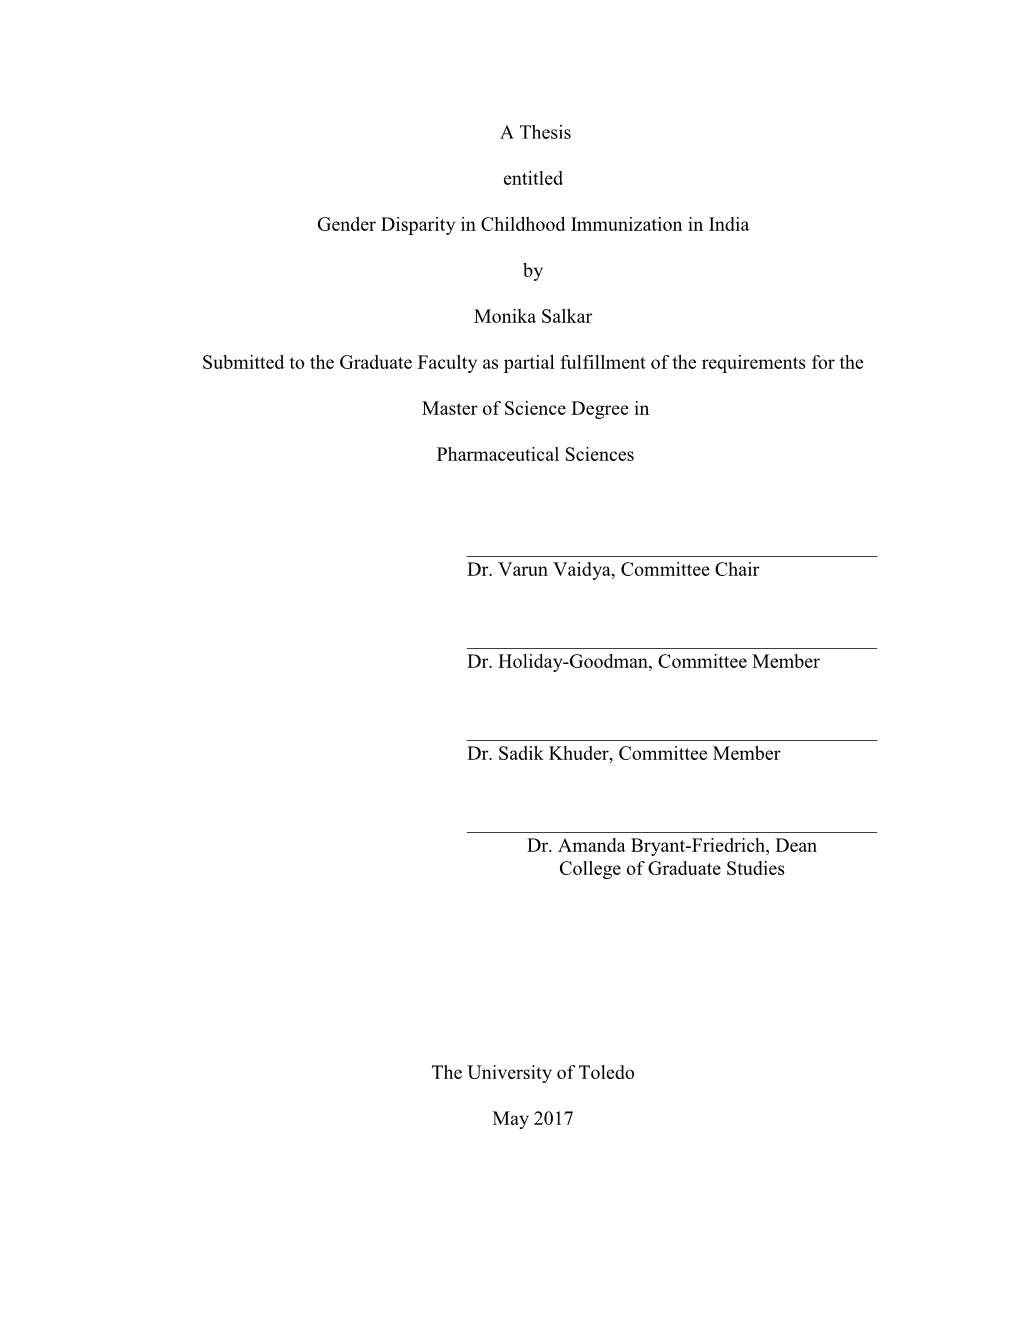 A Thesis Entitled Gender Disparity in Childhood Immunization in India By